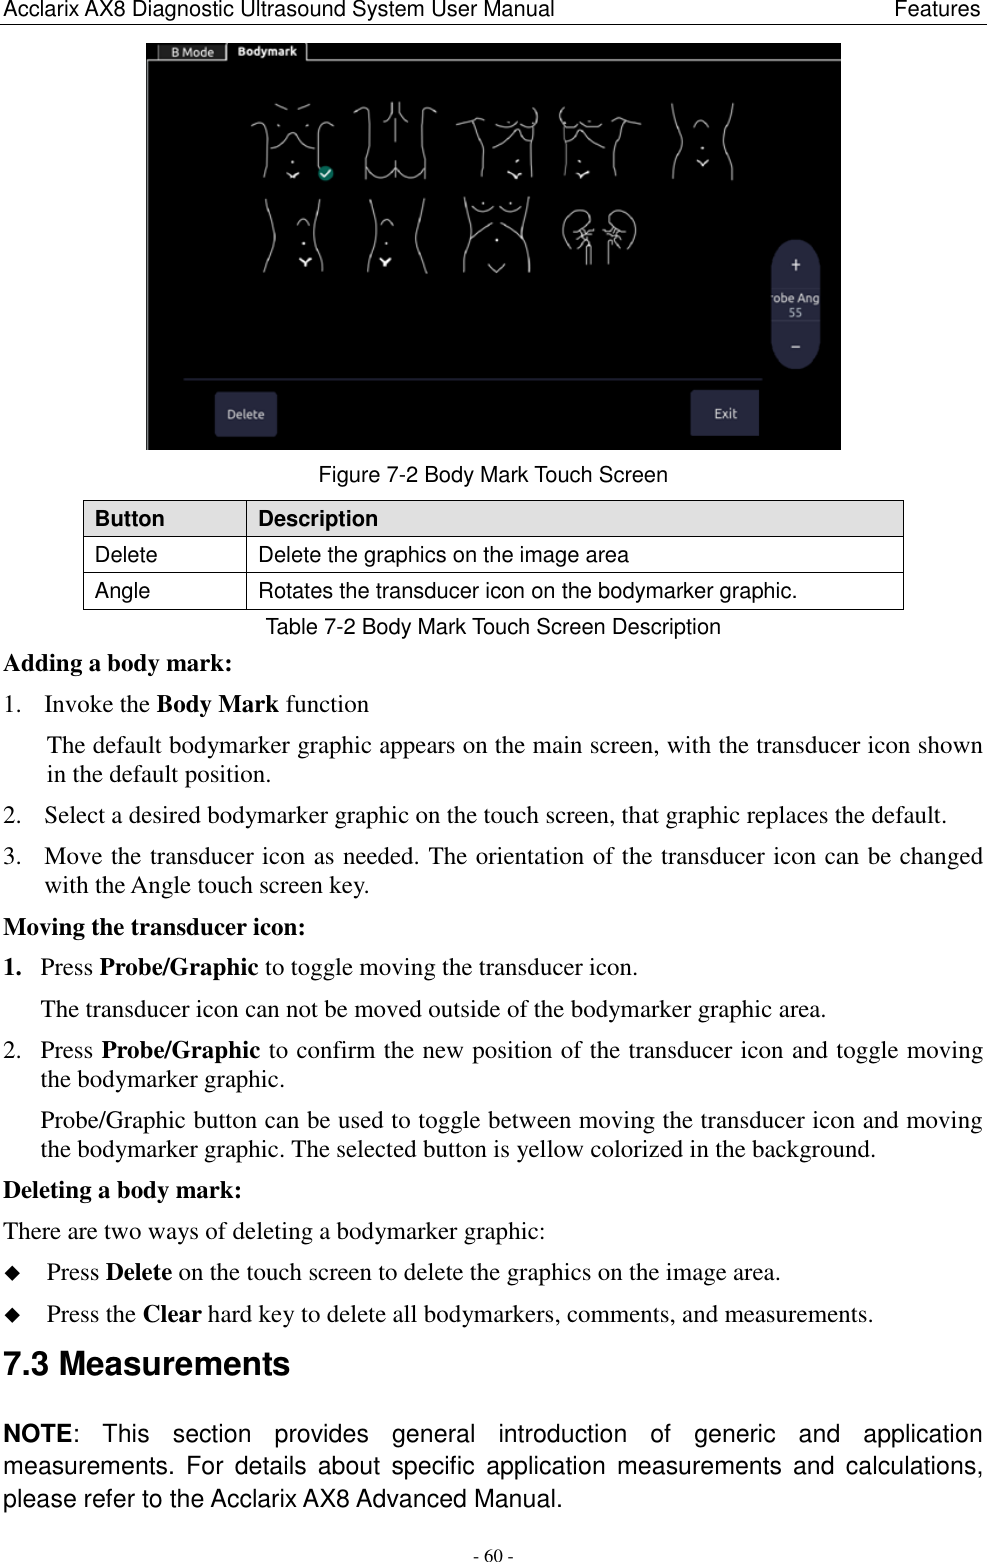 Acclarix AX8 Diagnostic Ultrasound System User Manual                                                              Features - 60 -  Figure 7-2 Body Mark Touch Screen Button Description Delete Delete the graphics on the image area Angle Rotates the transducer icon on the bodymarker graphic.   Table 7-2 Body Mark Touch Screen Description Adding a body mark: 1. Invoke the Body Mark function The default bodymarker graphic appears on the main screen, with the transducer icon shown in the default position. 2. Select a desired bodymarker graphic on the touch screen, that graphic replaces the default. 3. Move the transducer icon as needed. The orientation of the transducer icon can be changed with the Angle touch screen key. Moving the transducer icon: 1. Press Probe/Graphic to toggle moving the transducer icon. The transducer icon can not be moved outside of the bodymarker graphic area. 2. Press Probe/Graphic to confirm the new position of the transducer icon and toggle moving the bodymarker graphic. Probe/Graphic button can be used to toggle between moving the transducer icon and moving the bodymarker graphic. The selected button is yellow colorized in the background.   Deleting a body mark: There are two ways of deleting a bodymarker graphic:  Press Delete on the touch screen to delete the graphics on the image area.  Press the Clear hard key to delete all bodymarkers, comments, and measurements. 7.3 Measurements NOTE:  This  section  provides  general  introduction  of  generic  and  application measurements. For  details  about  specific  application  measurements and  calculations, please refer to the Acclarix AX8 Advanced Manual. 